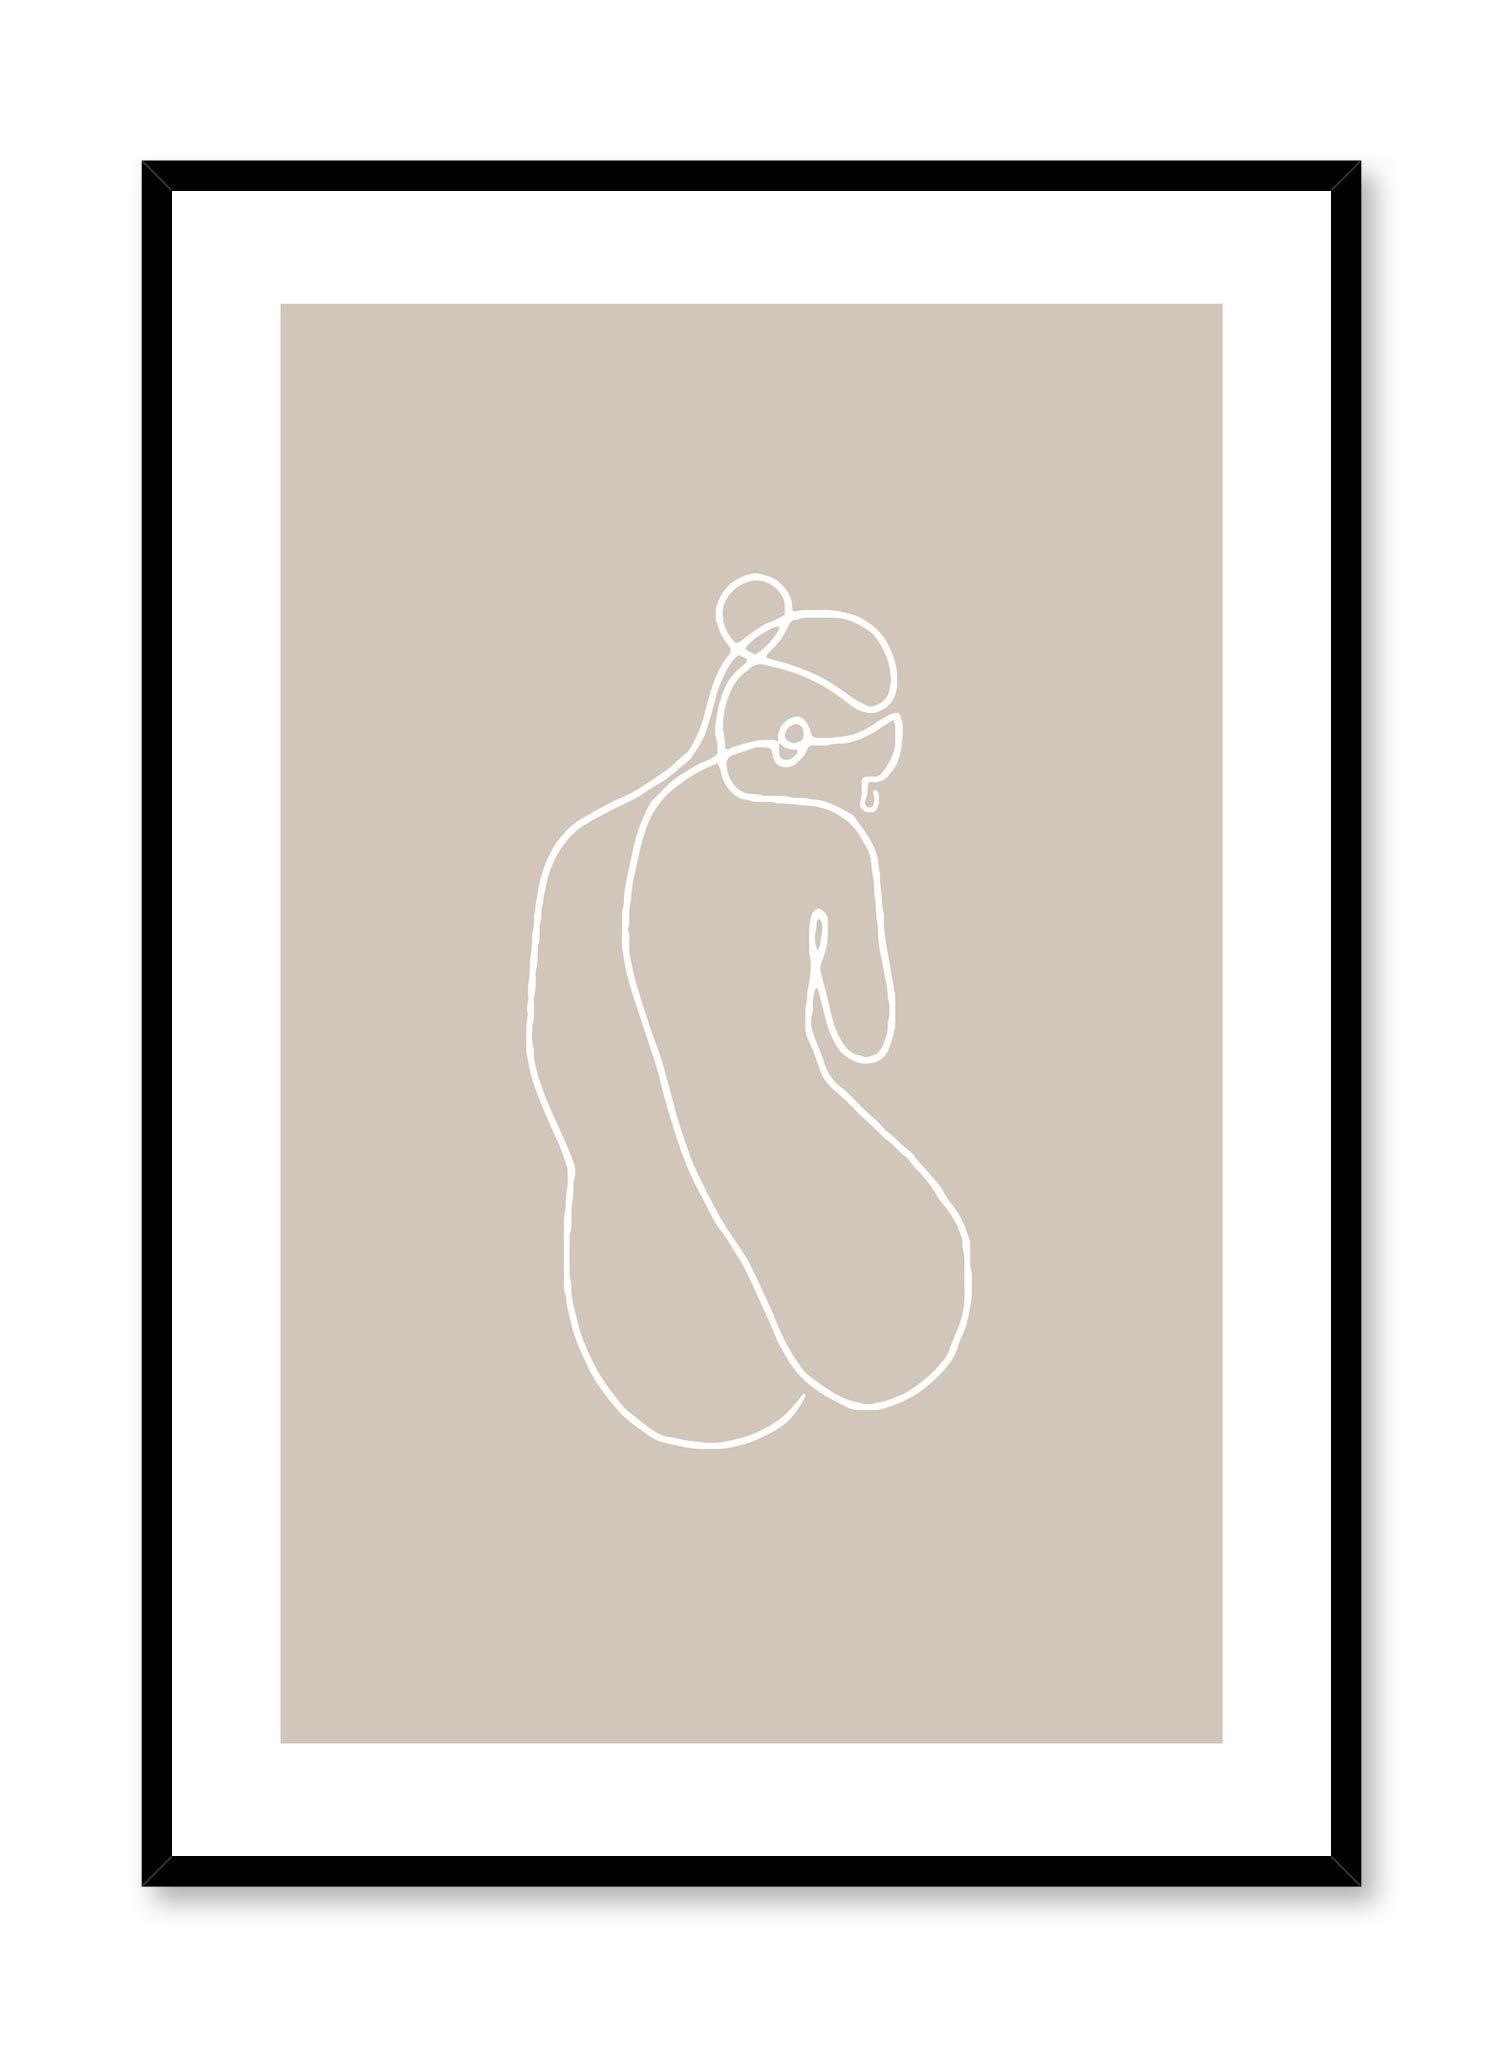 Modern minimalist poster by Opposite Wall with abstract line art illustration of Silhouette with tan beige background